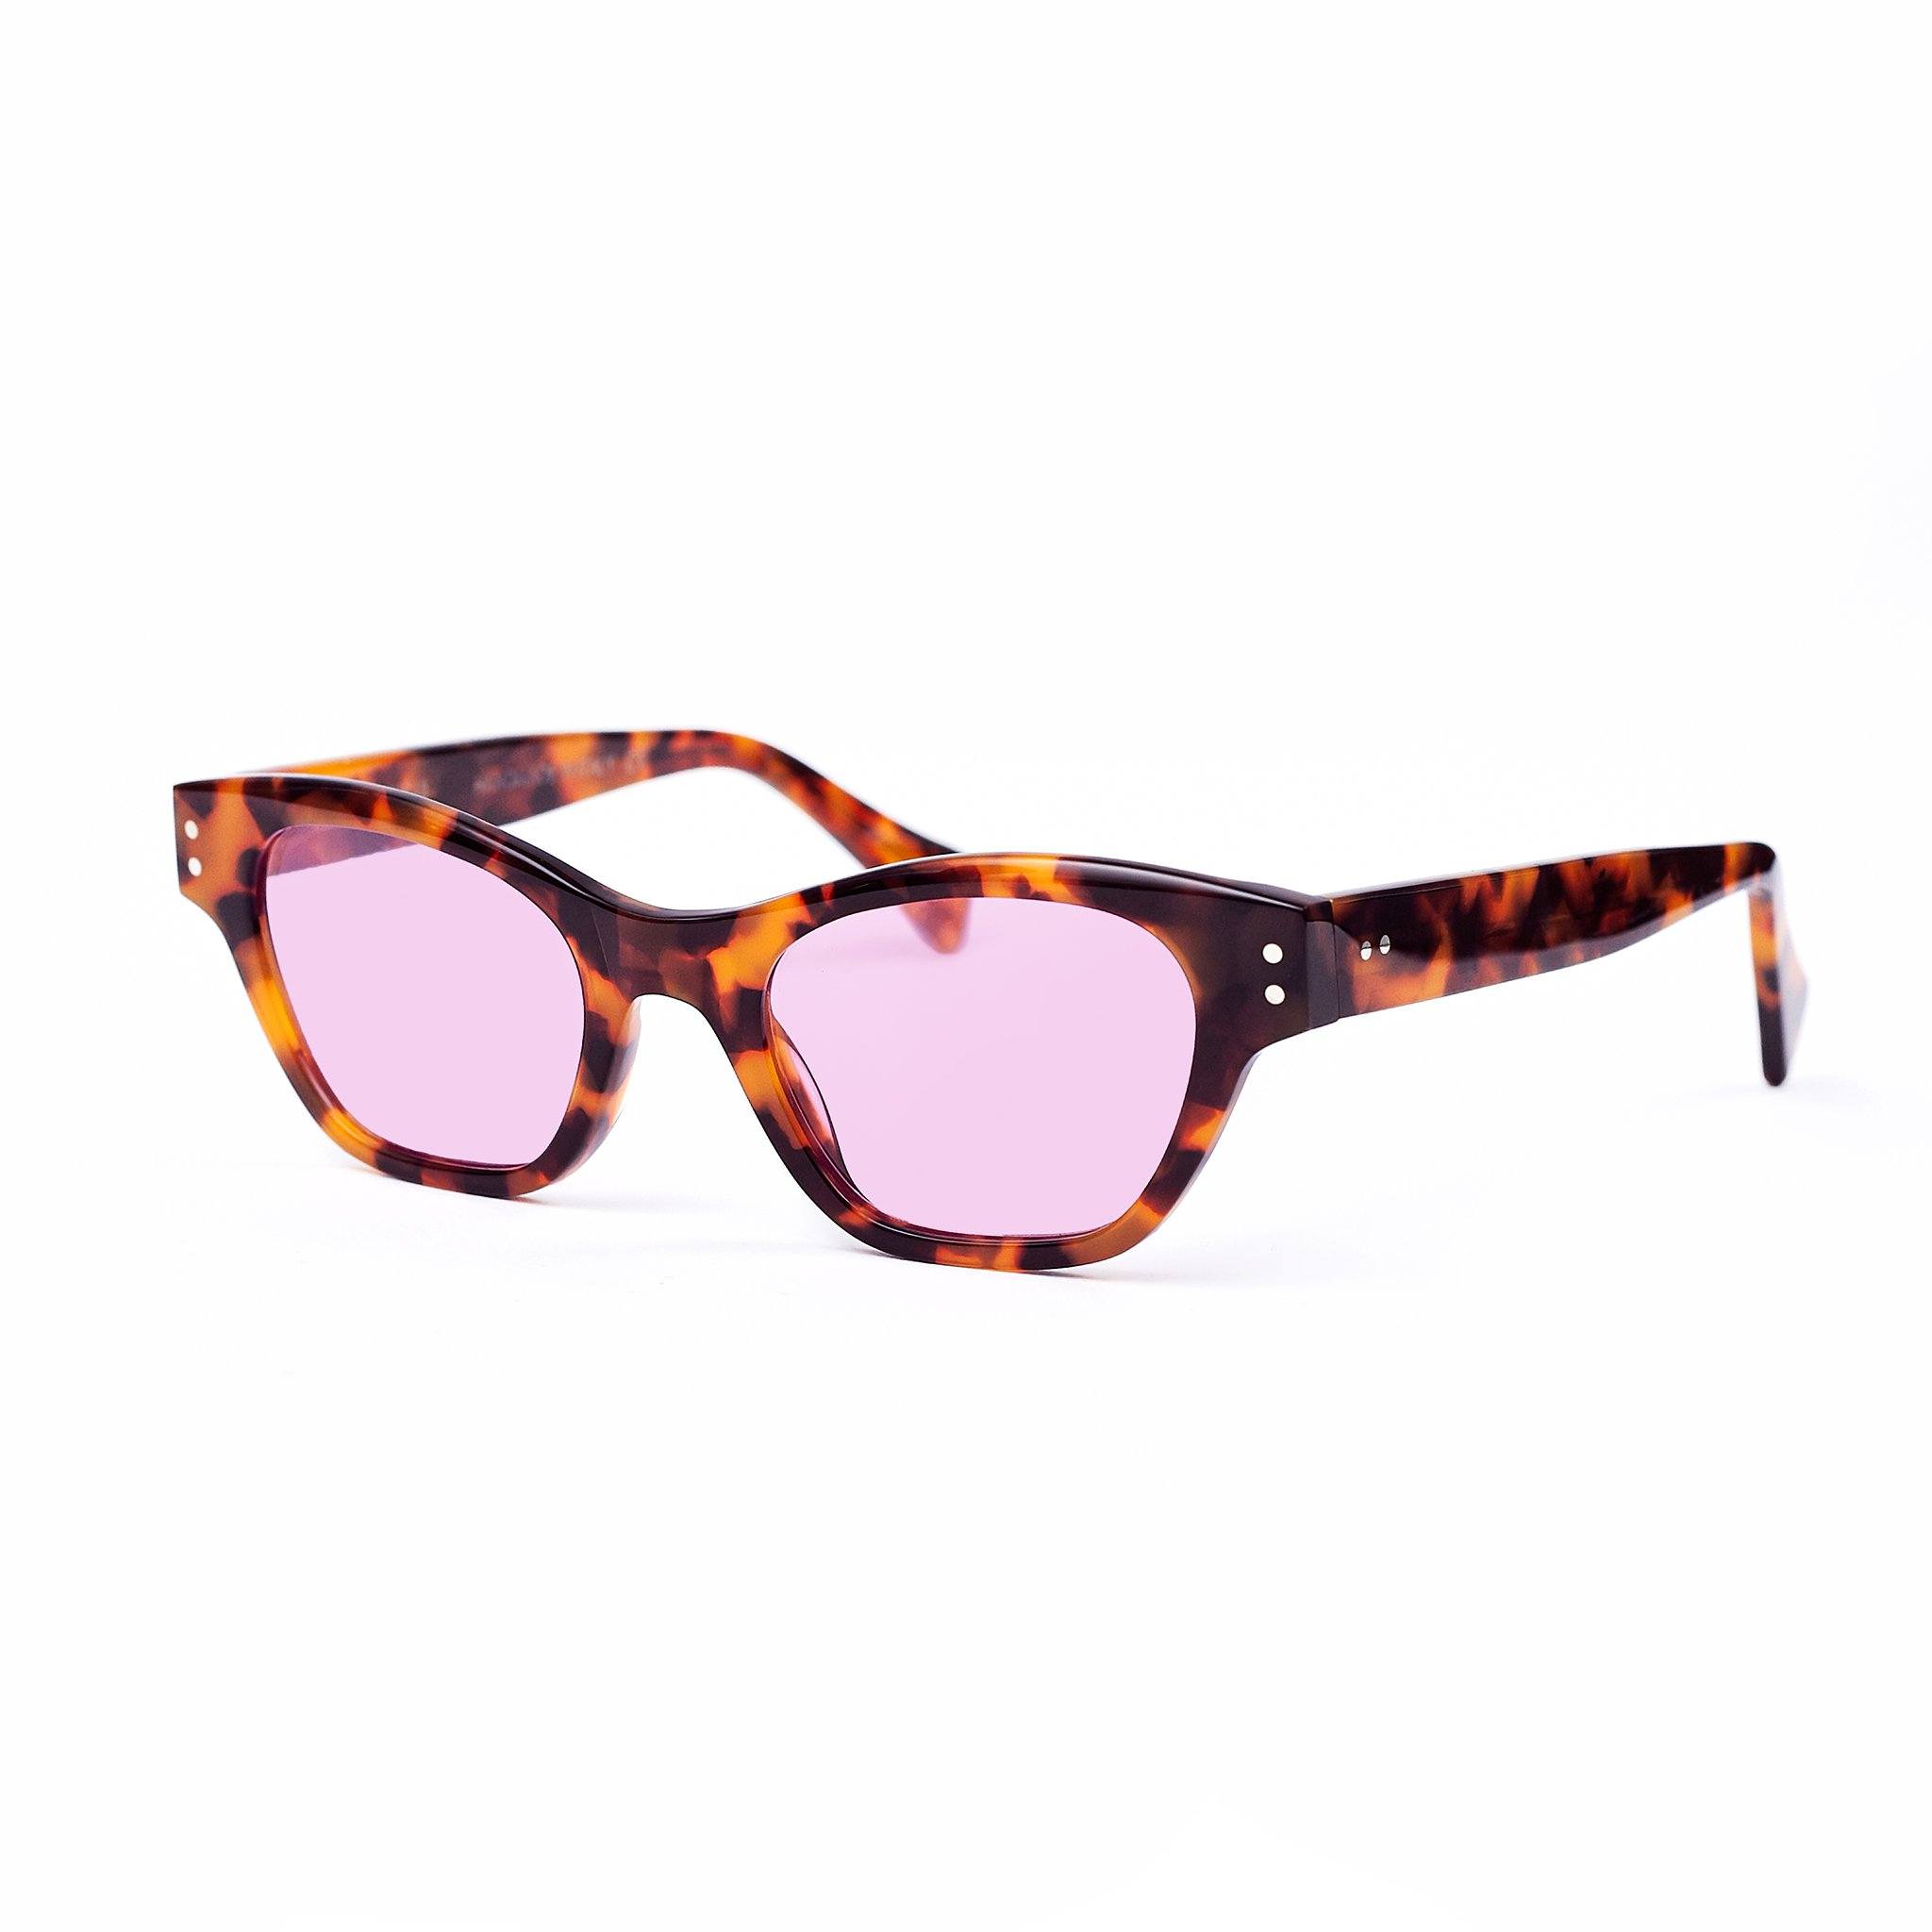 Tortoiose cat-eye sunglasses with pink lenses handmade in italy